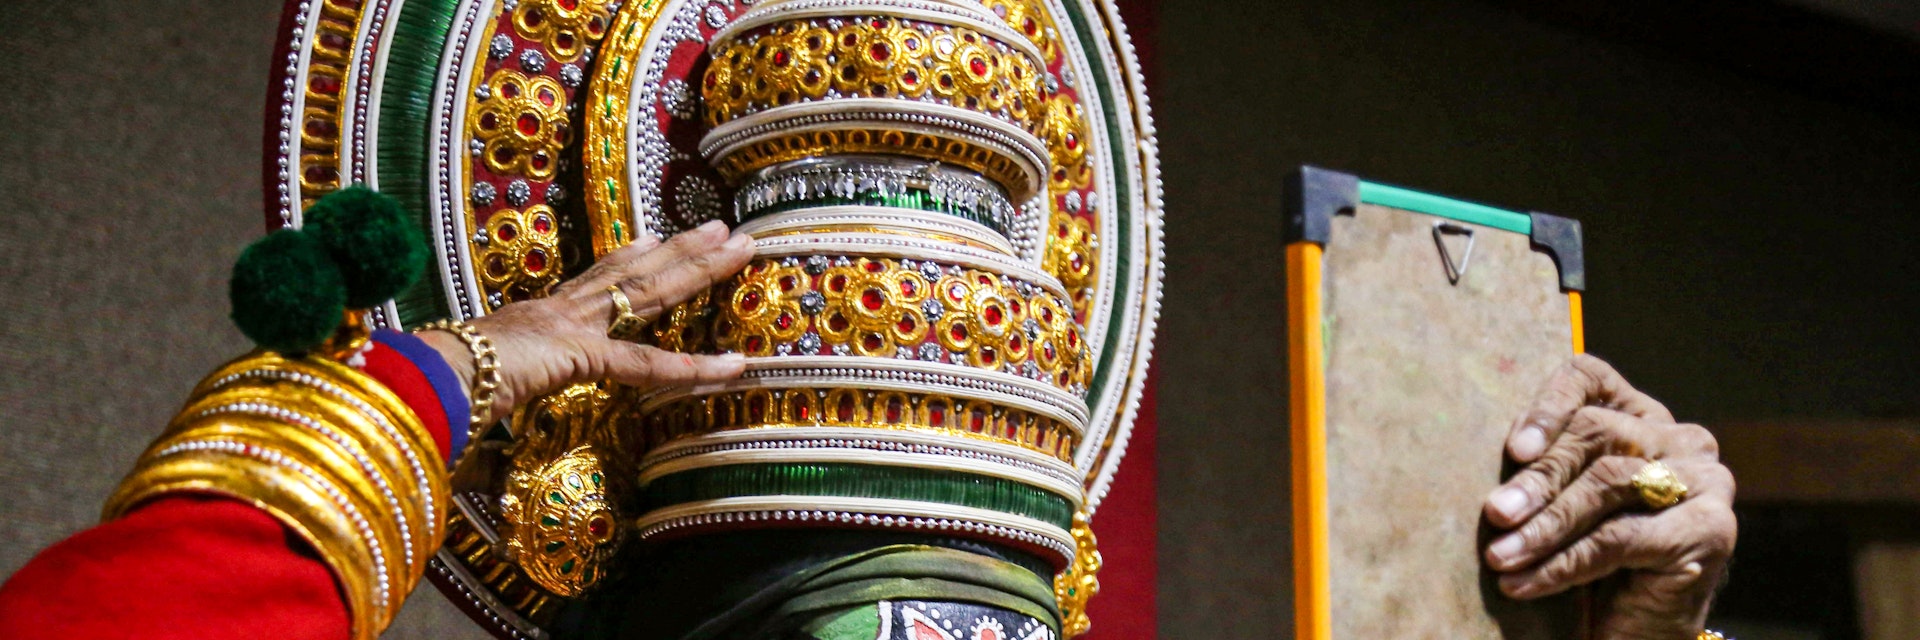 An artist from the Kathakali School Society of Thrissur prepares backstage for his performance in a programme organised by Madhya Pradesh Tribal Museum in Bhopal on June 18, 2018. (Photo by - / AFP)        (Photo credit should read -/AFP/Getty Images)